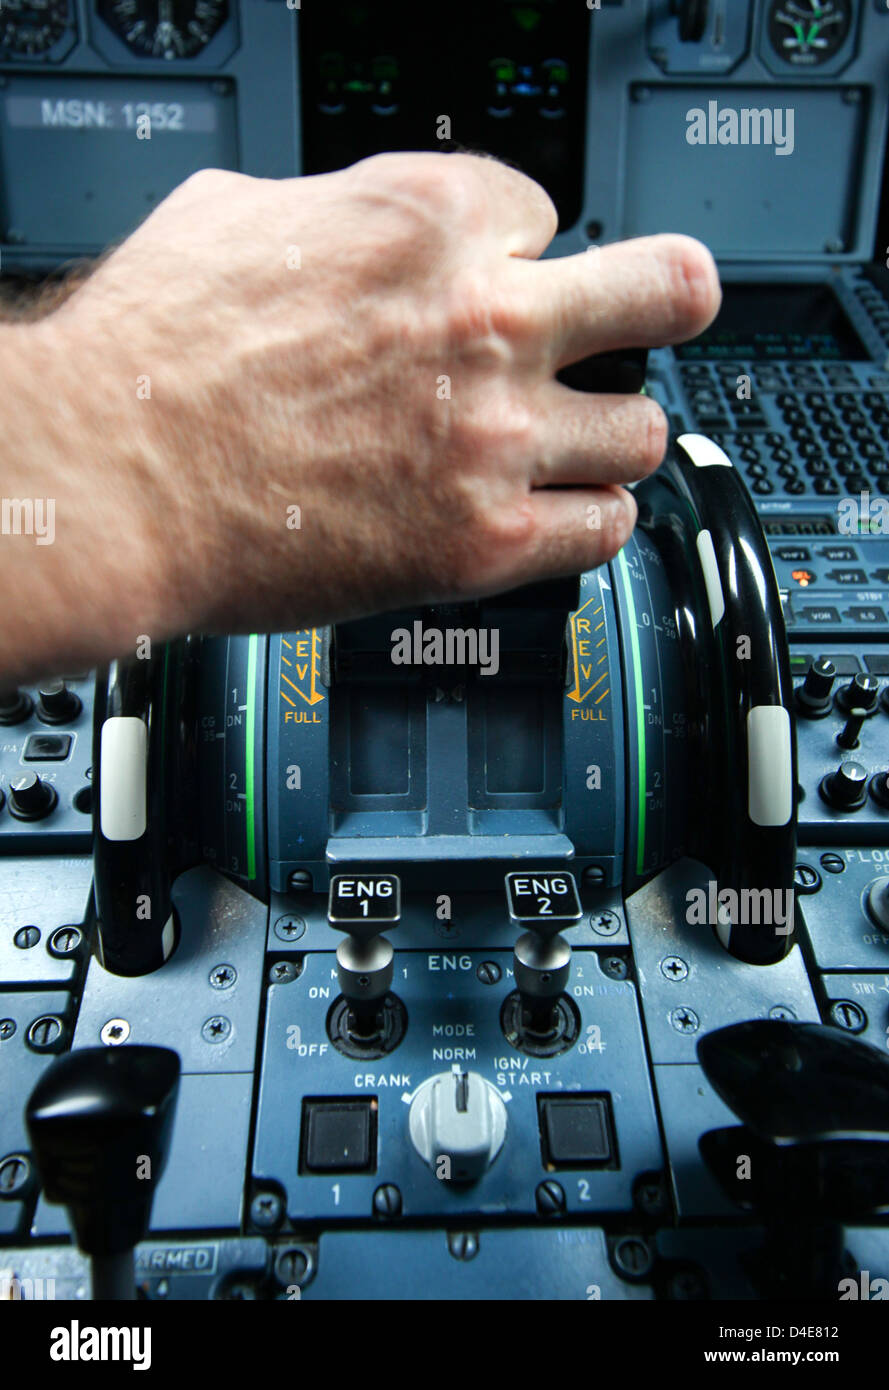 View of cockpit in air plain Airbus A320. Hand of pilot on engine controllers. Stock Photo